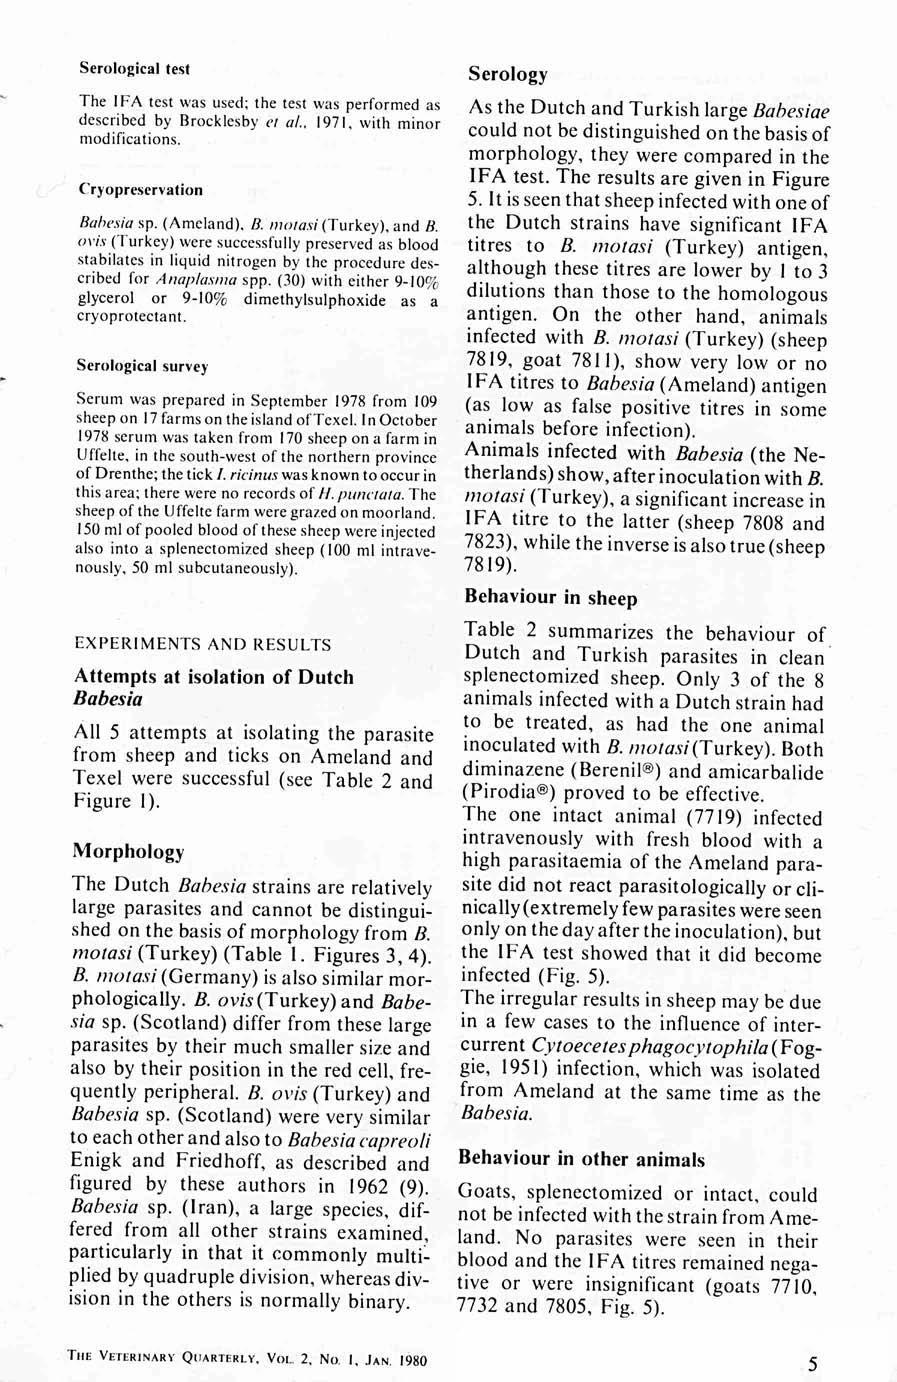 Serologicl test The I FA test ws used; the test ws performed s described by Brocklesby et l.. 1971, minor modifictions. Cryopreservtion Bbesi sp. (Amelnd), B. motsi (Turkey), nd B.